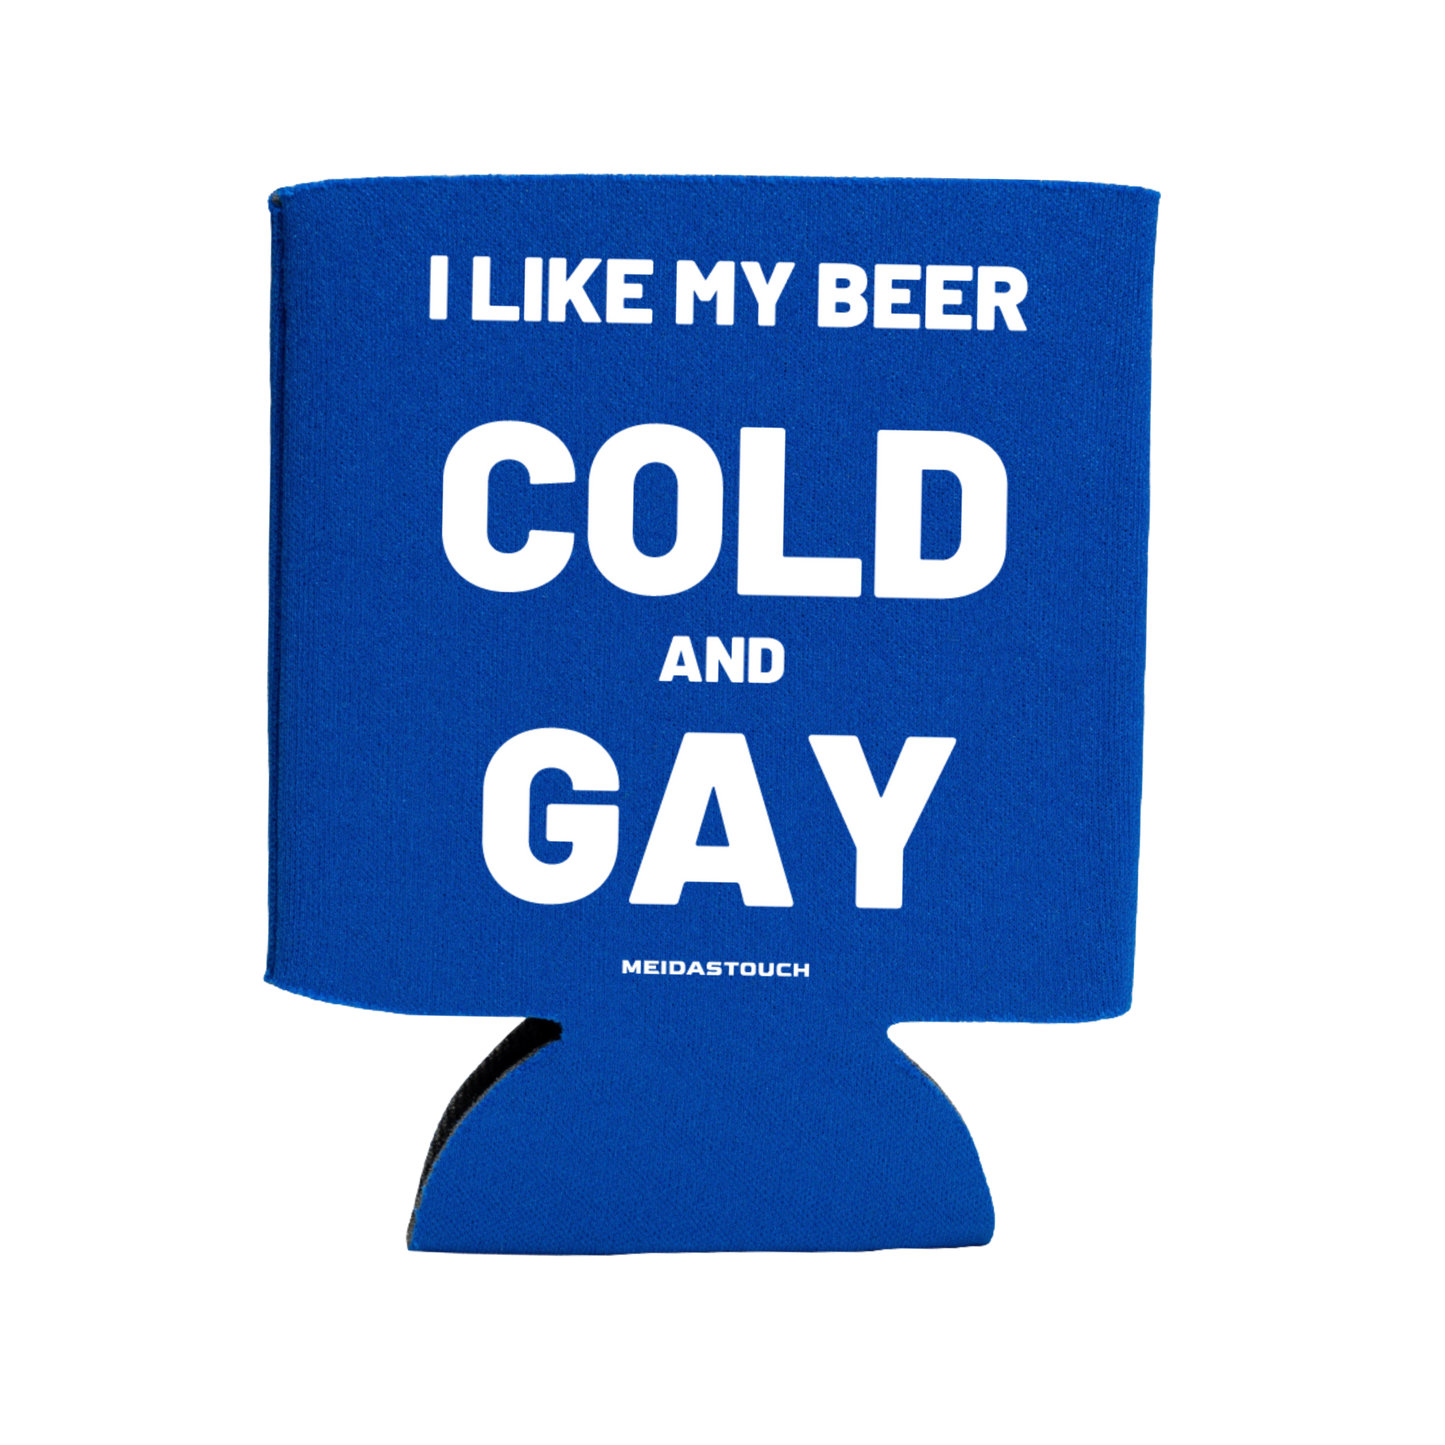 I Like My Beer Cold and Gay Koozie